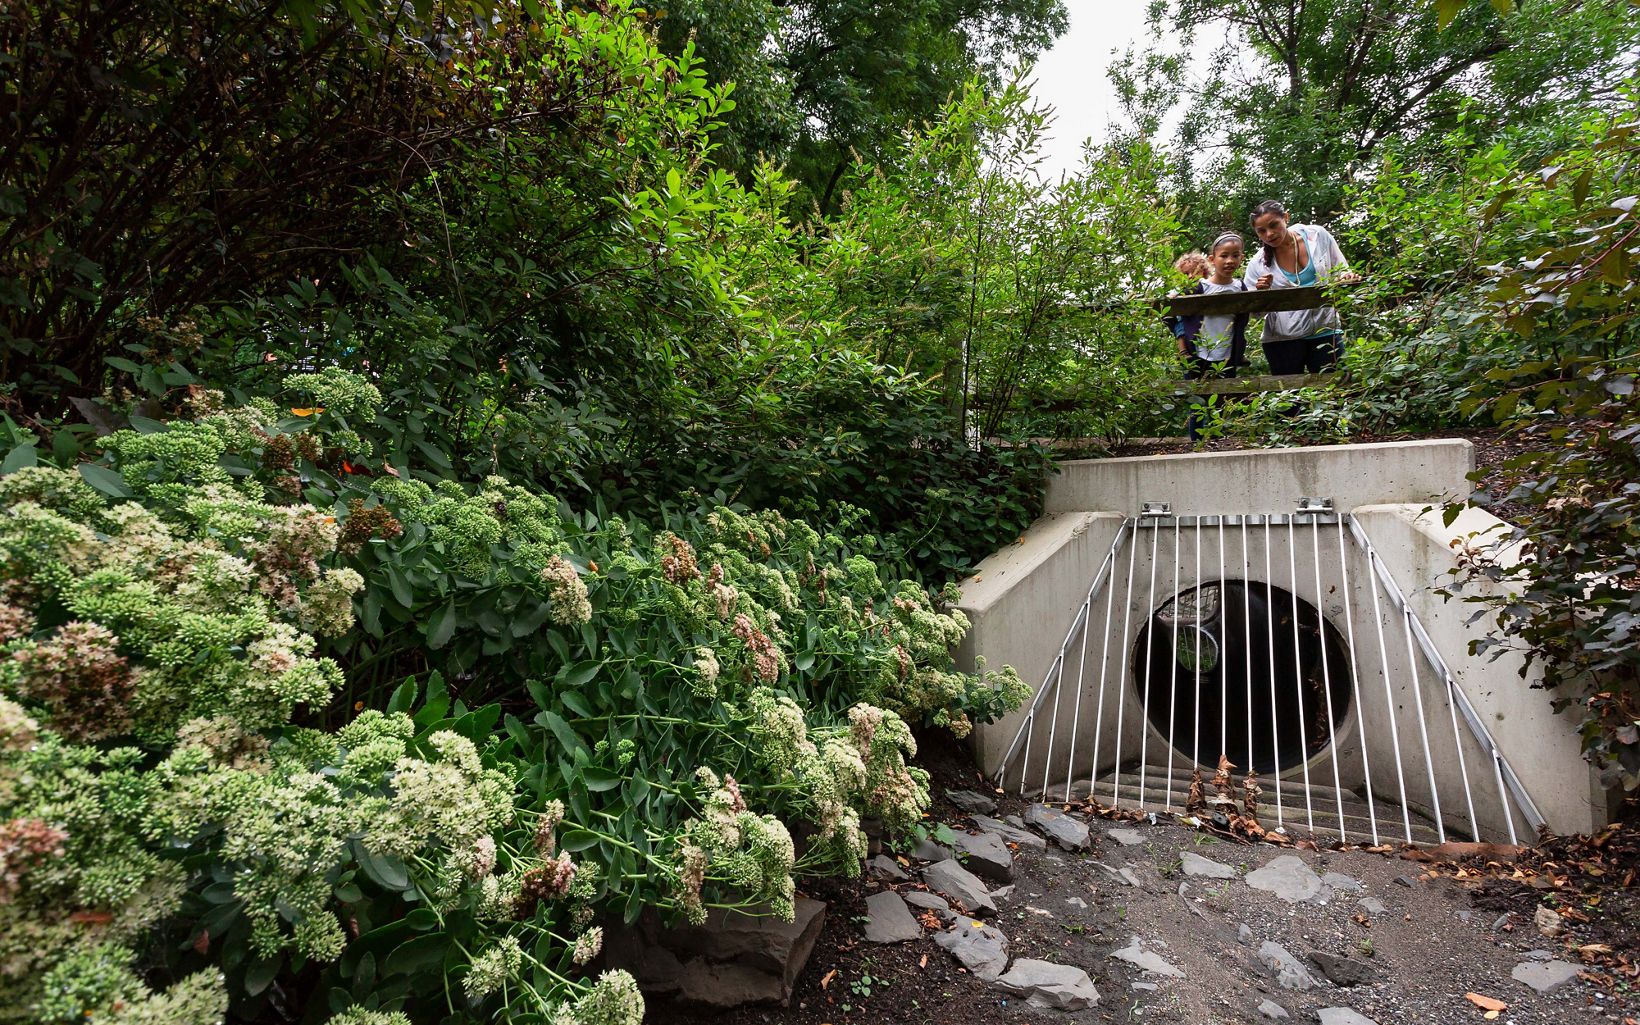 a culvert and bridge surrounded by plants and flowers